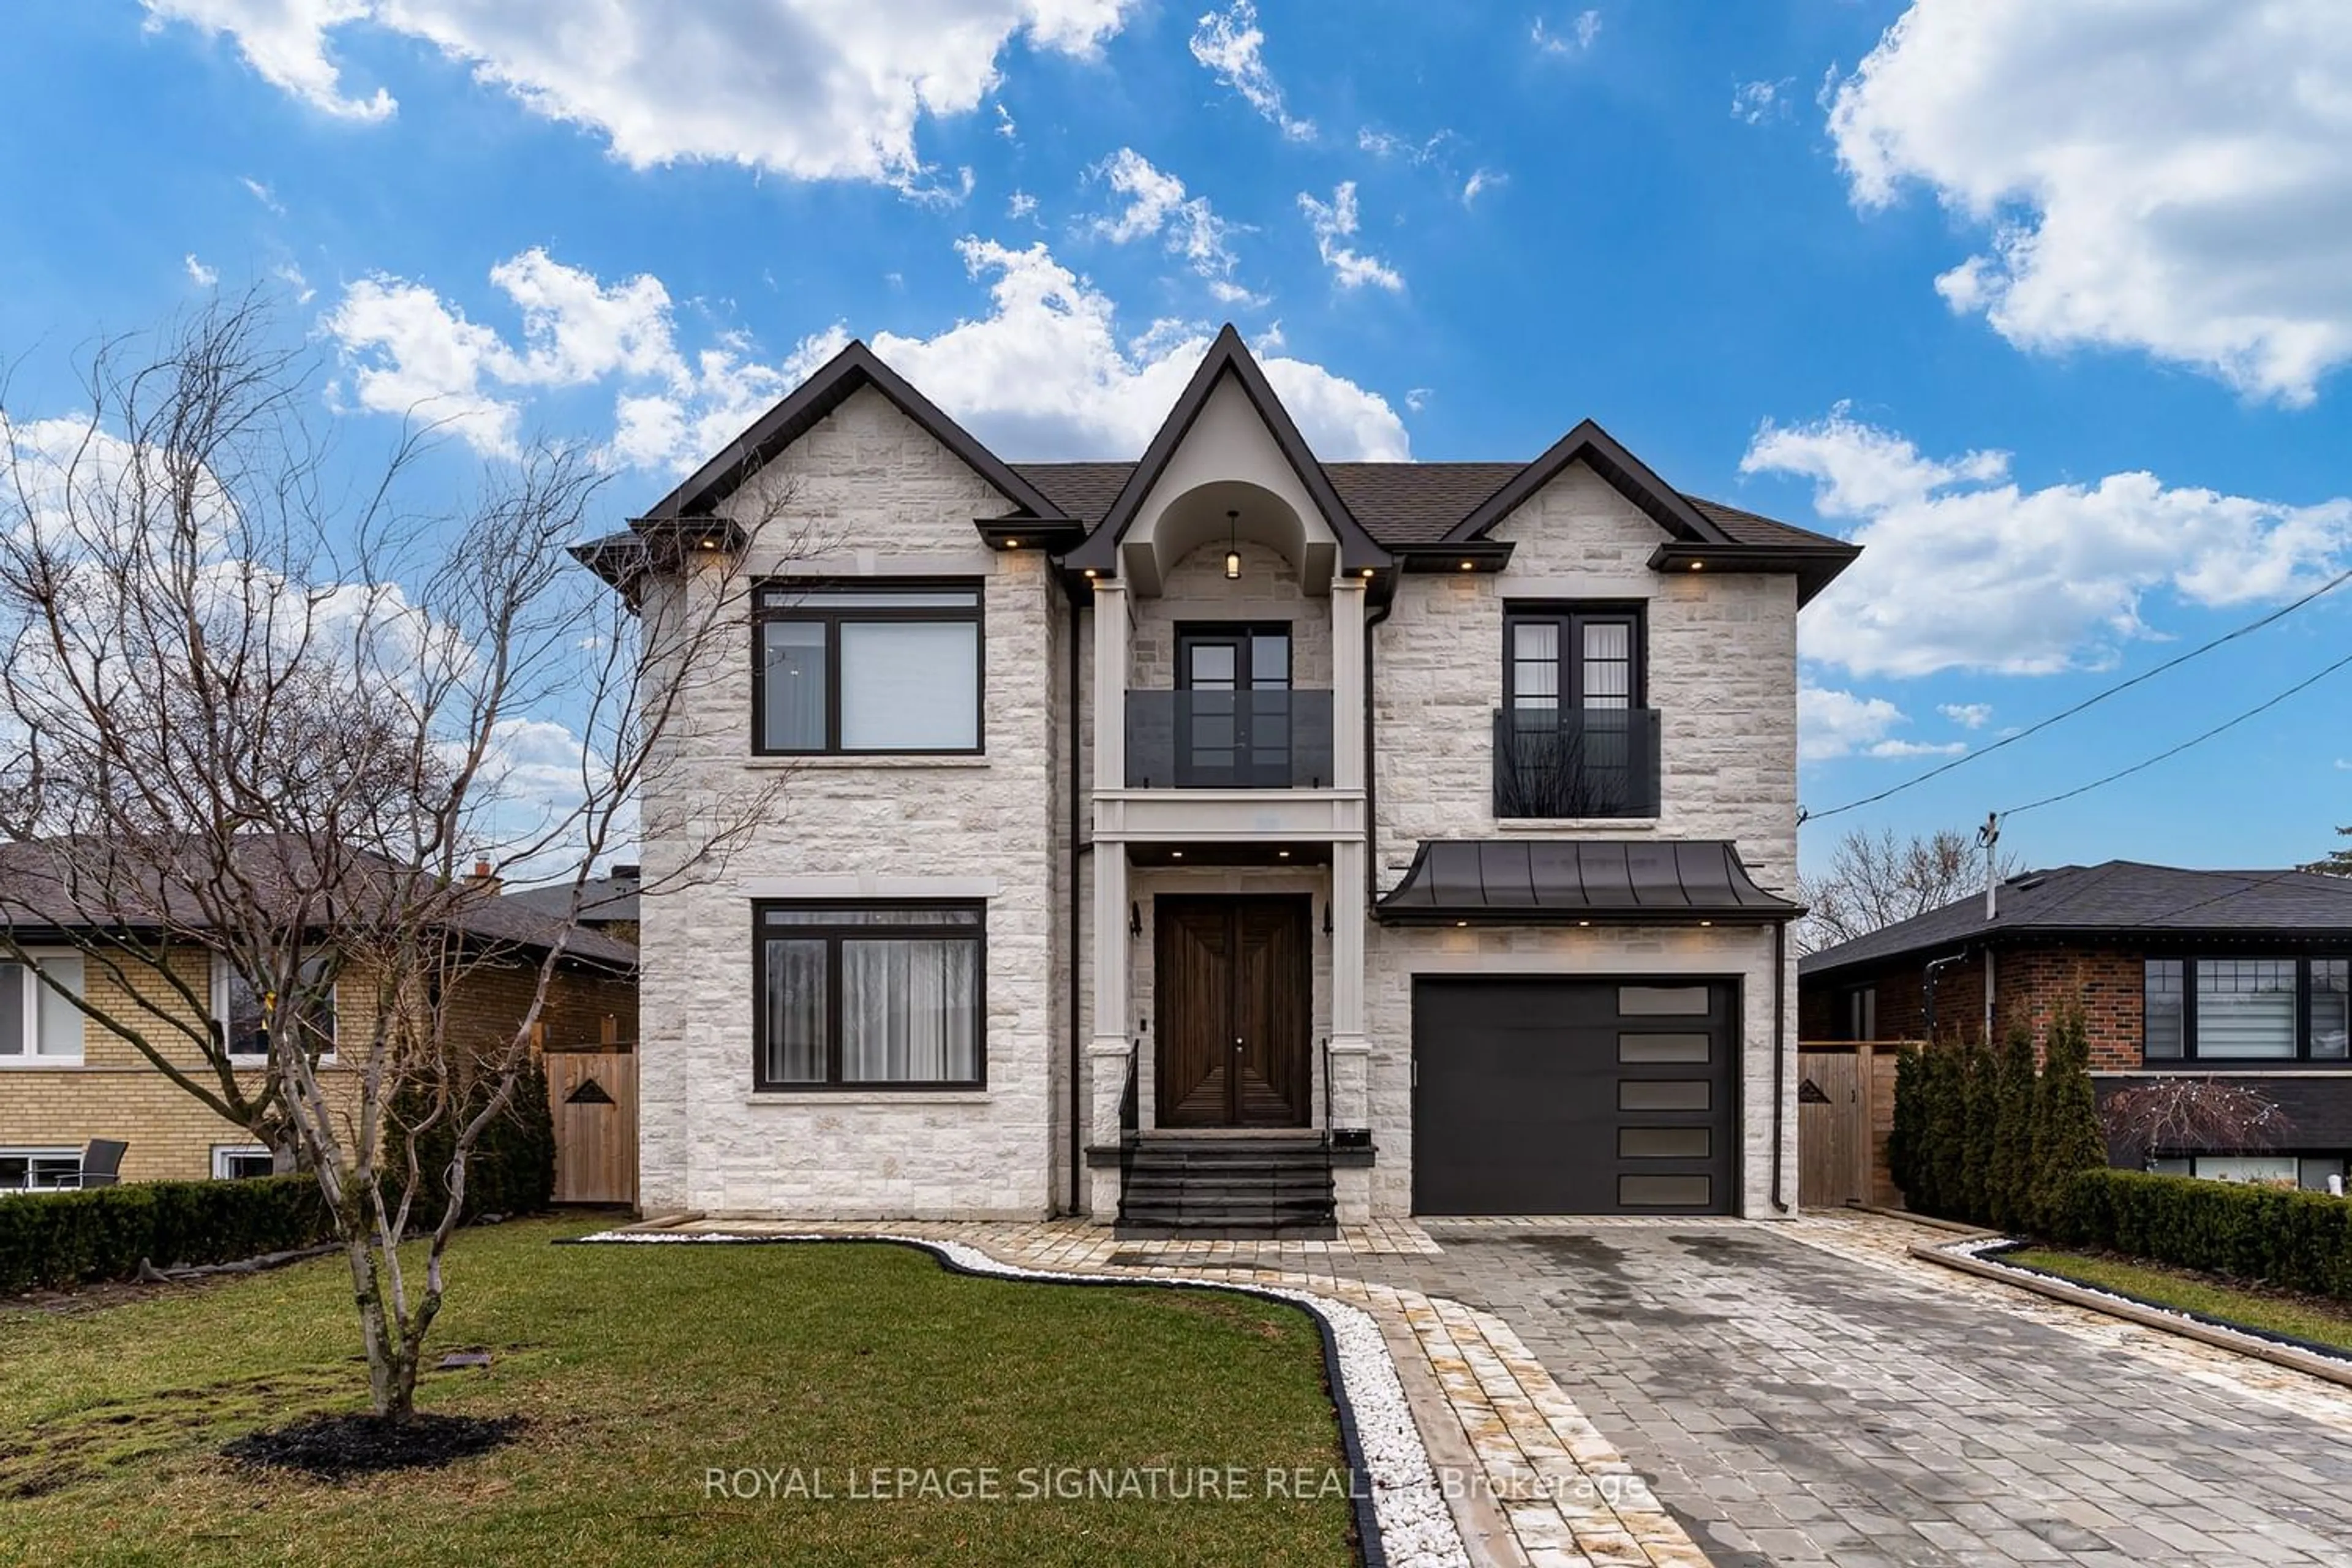 Home with brick exterior material for 29 Halkin Cres, Toronto Ontario M4A 1M8